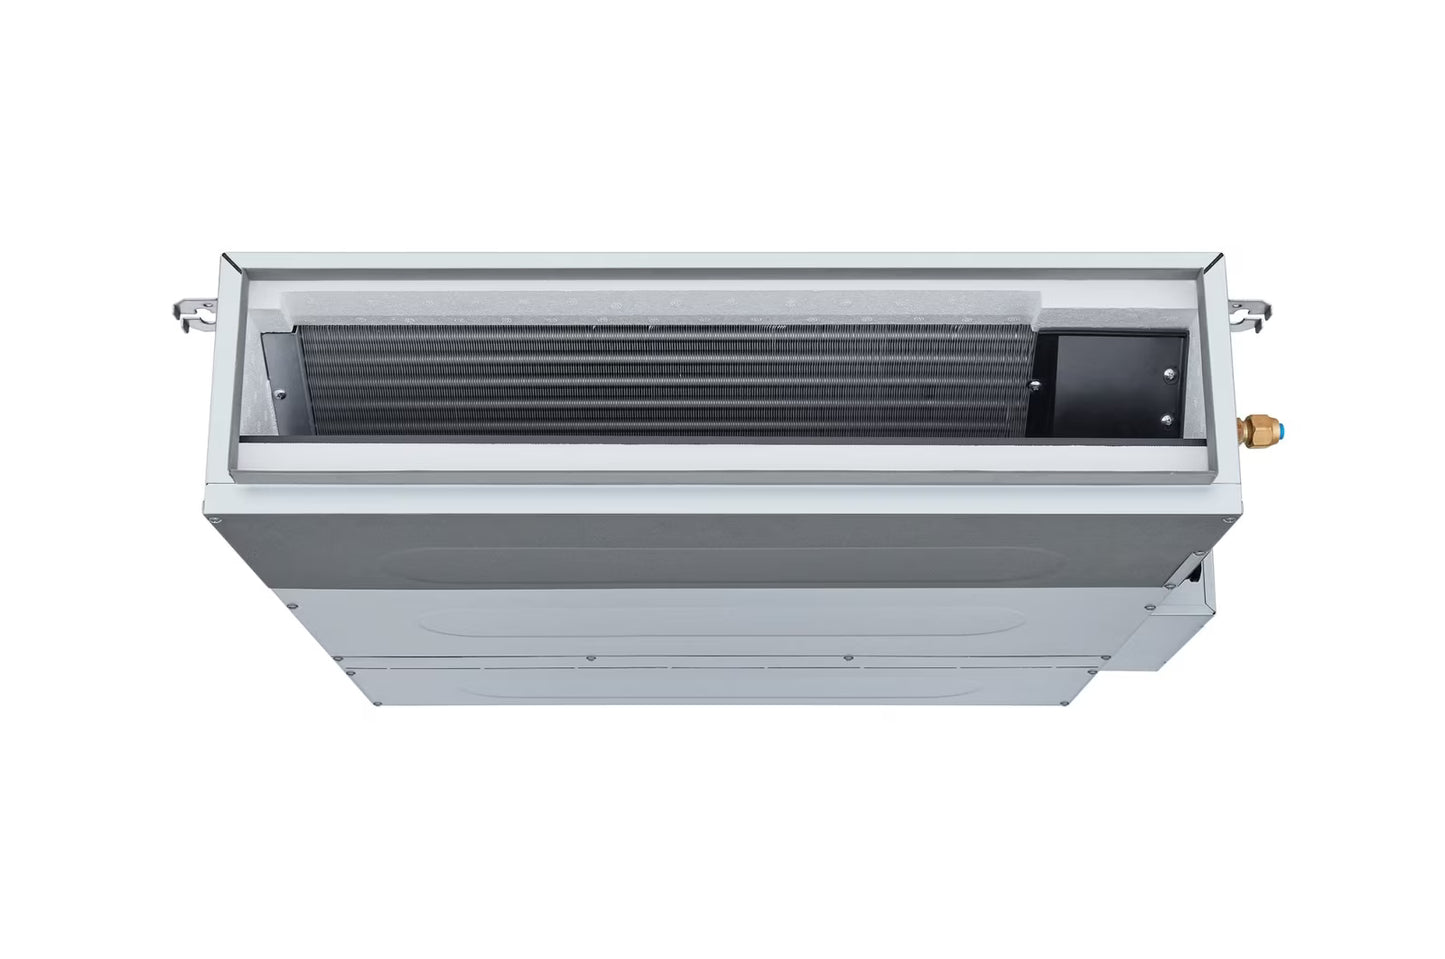 LG Ceiling Concealed Duct Unit 2.8KW with Low Static and E.S.P. Control for Multiple Rooms - ARNU09GL1G4